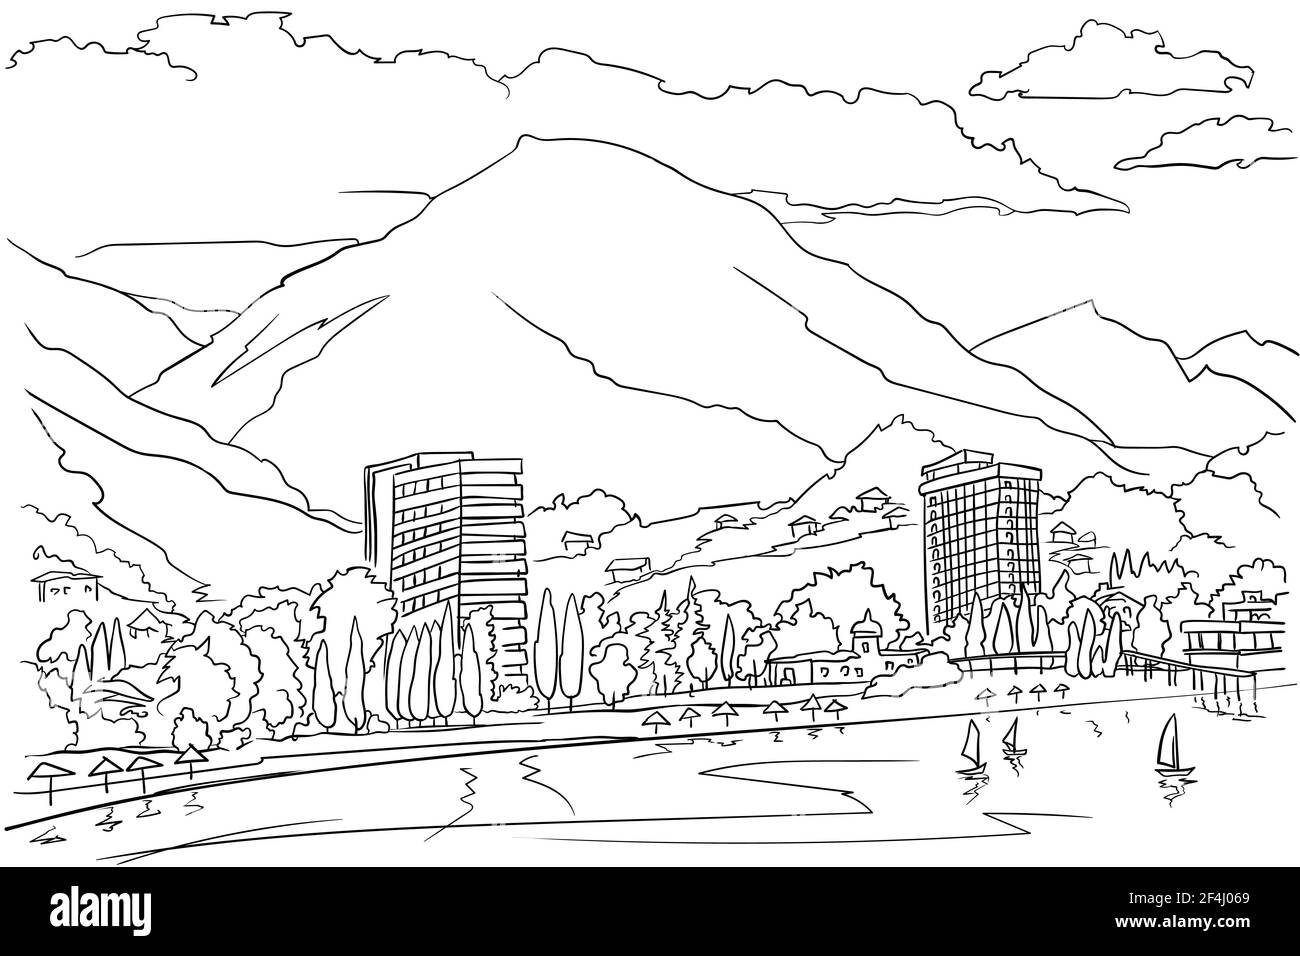 A resort town at the foot of the mountains by the sea. View from the sea. Linear black and white pen drawing. Stock Vector